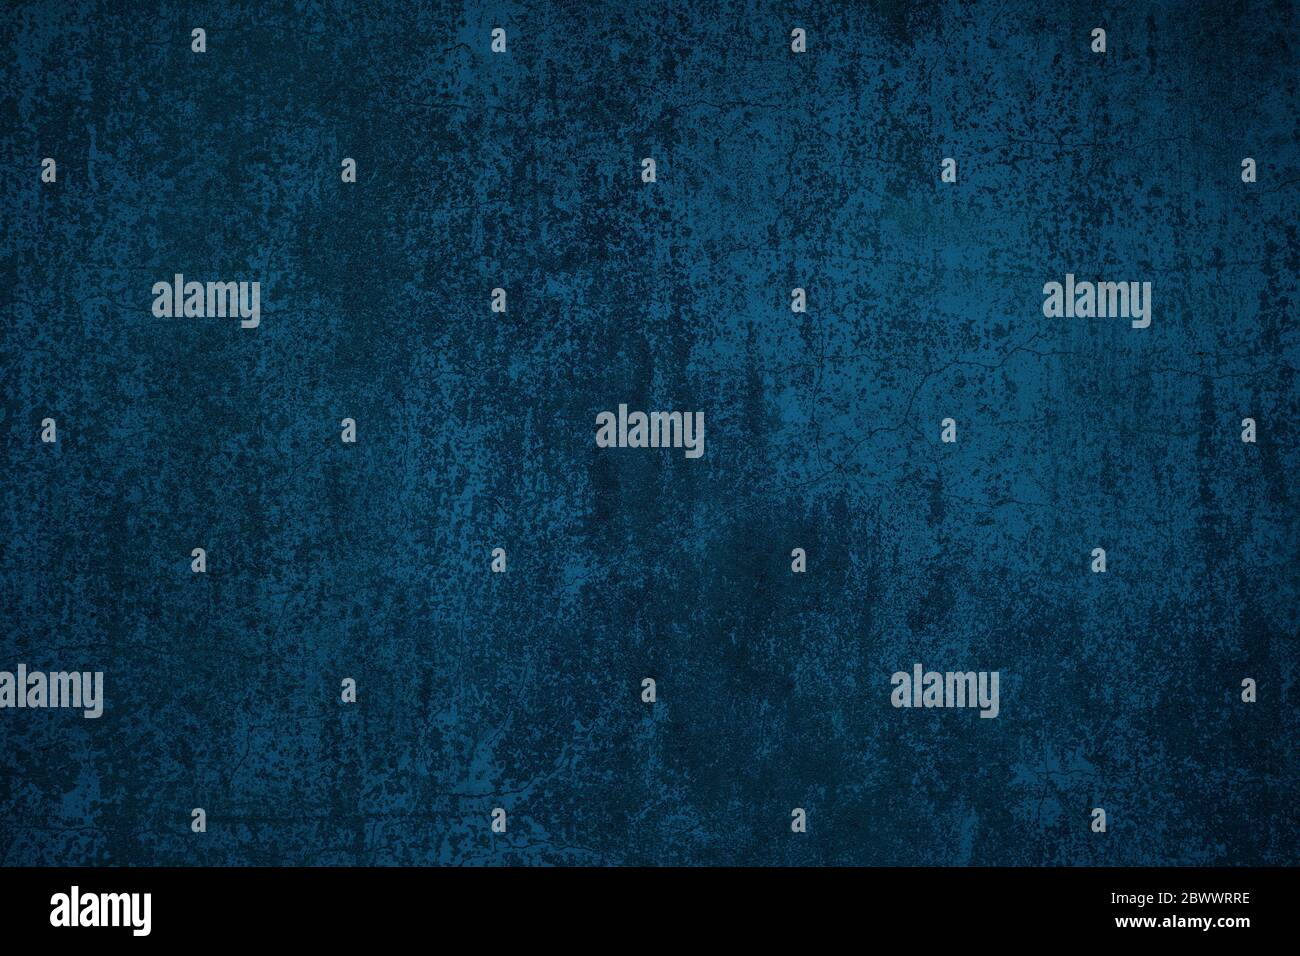 Blue Grunge Concrete Wall Texture Background. Stock Photo